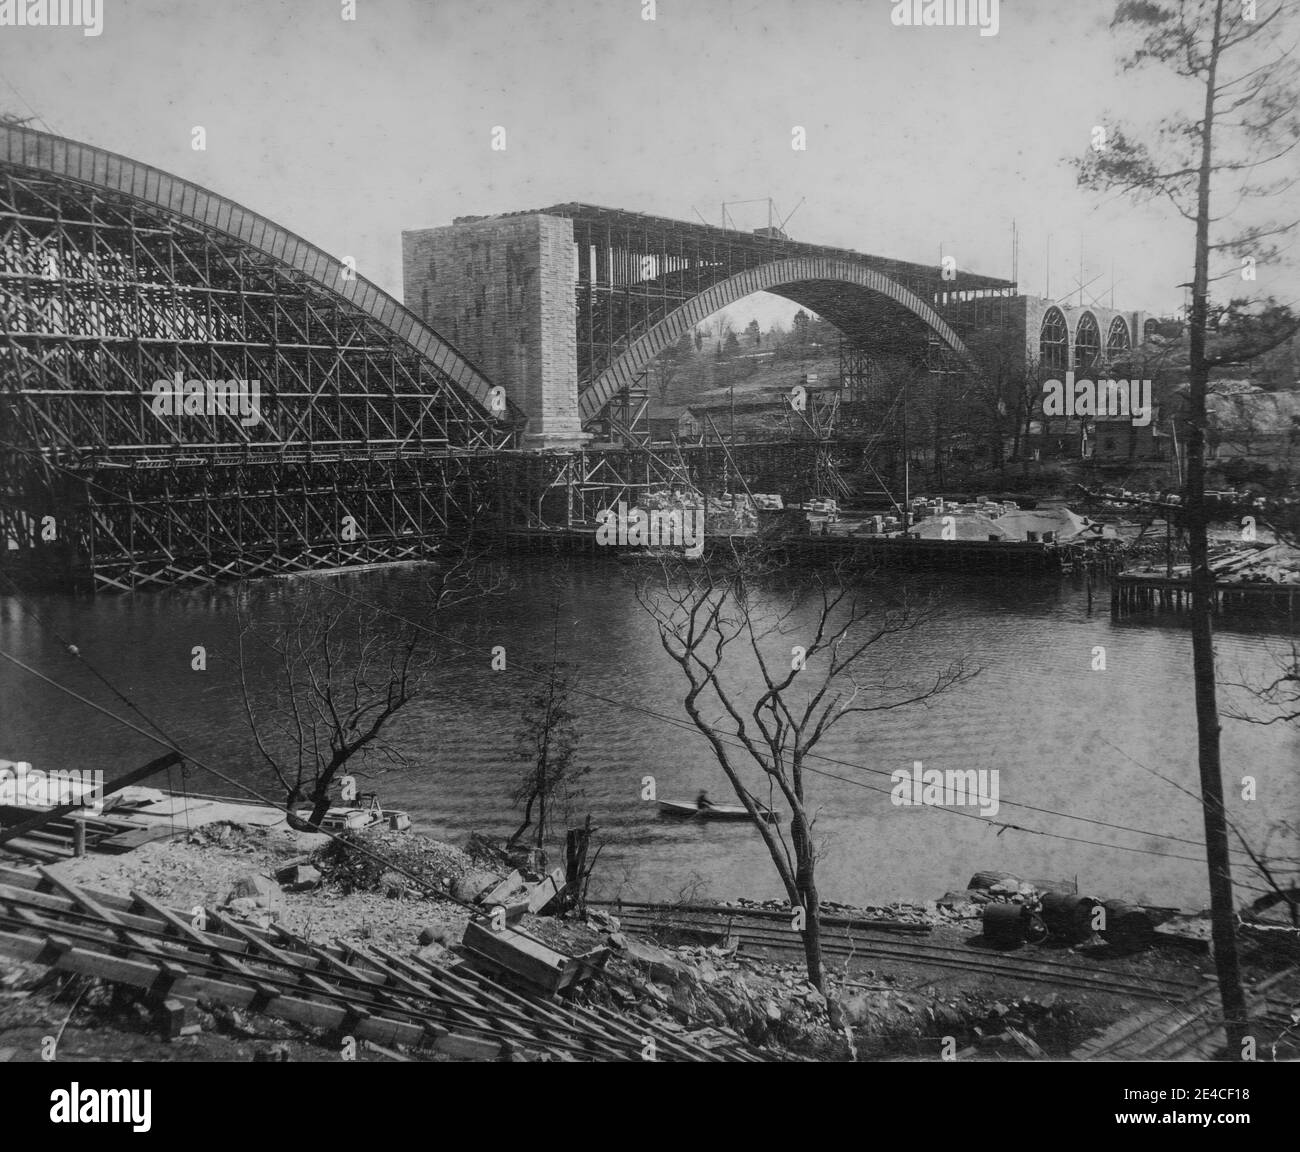 American archive monochrome photograph of Washington Bridge over the Harlem River, New York City, USA, under construction, taken in the 1880s Stock Photo